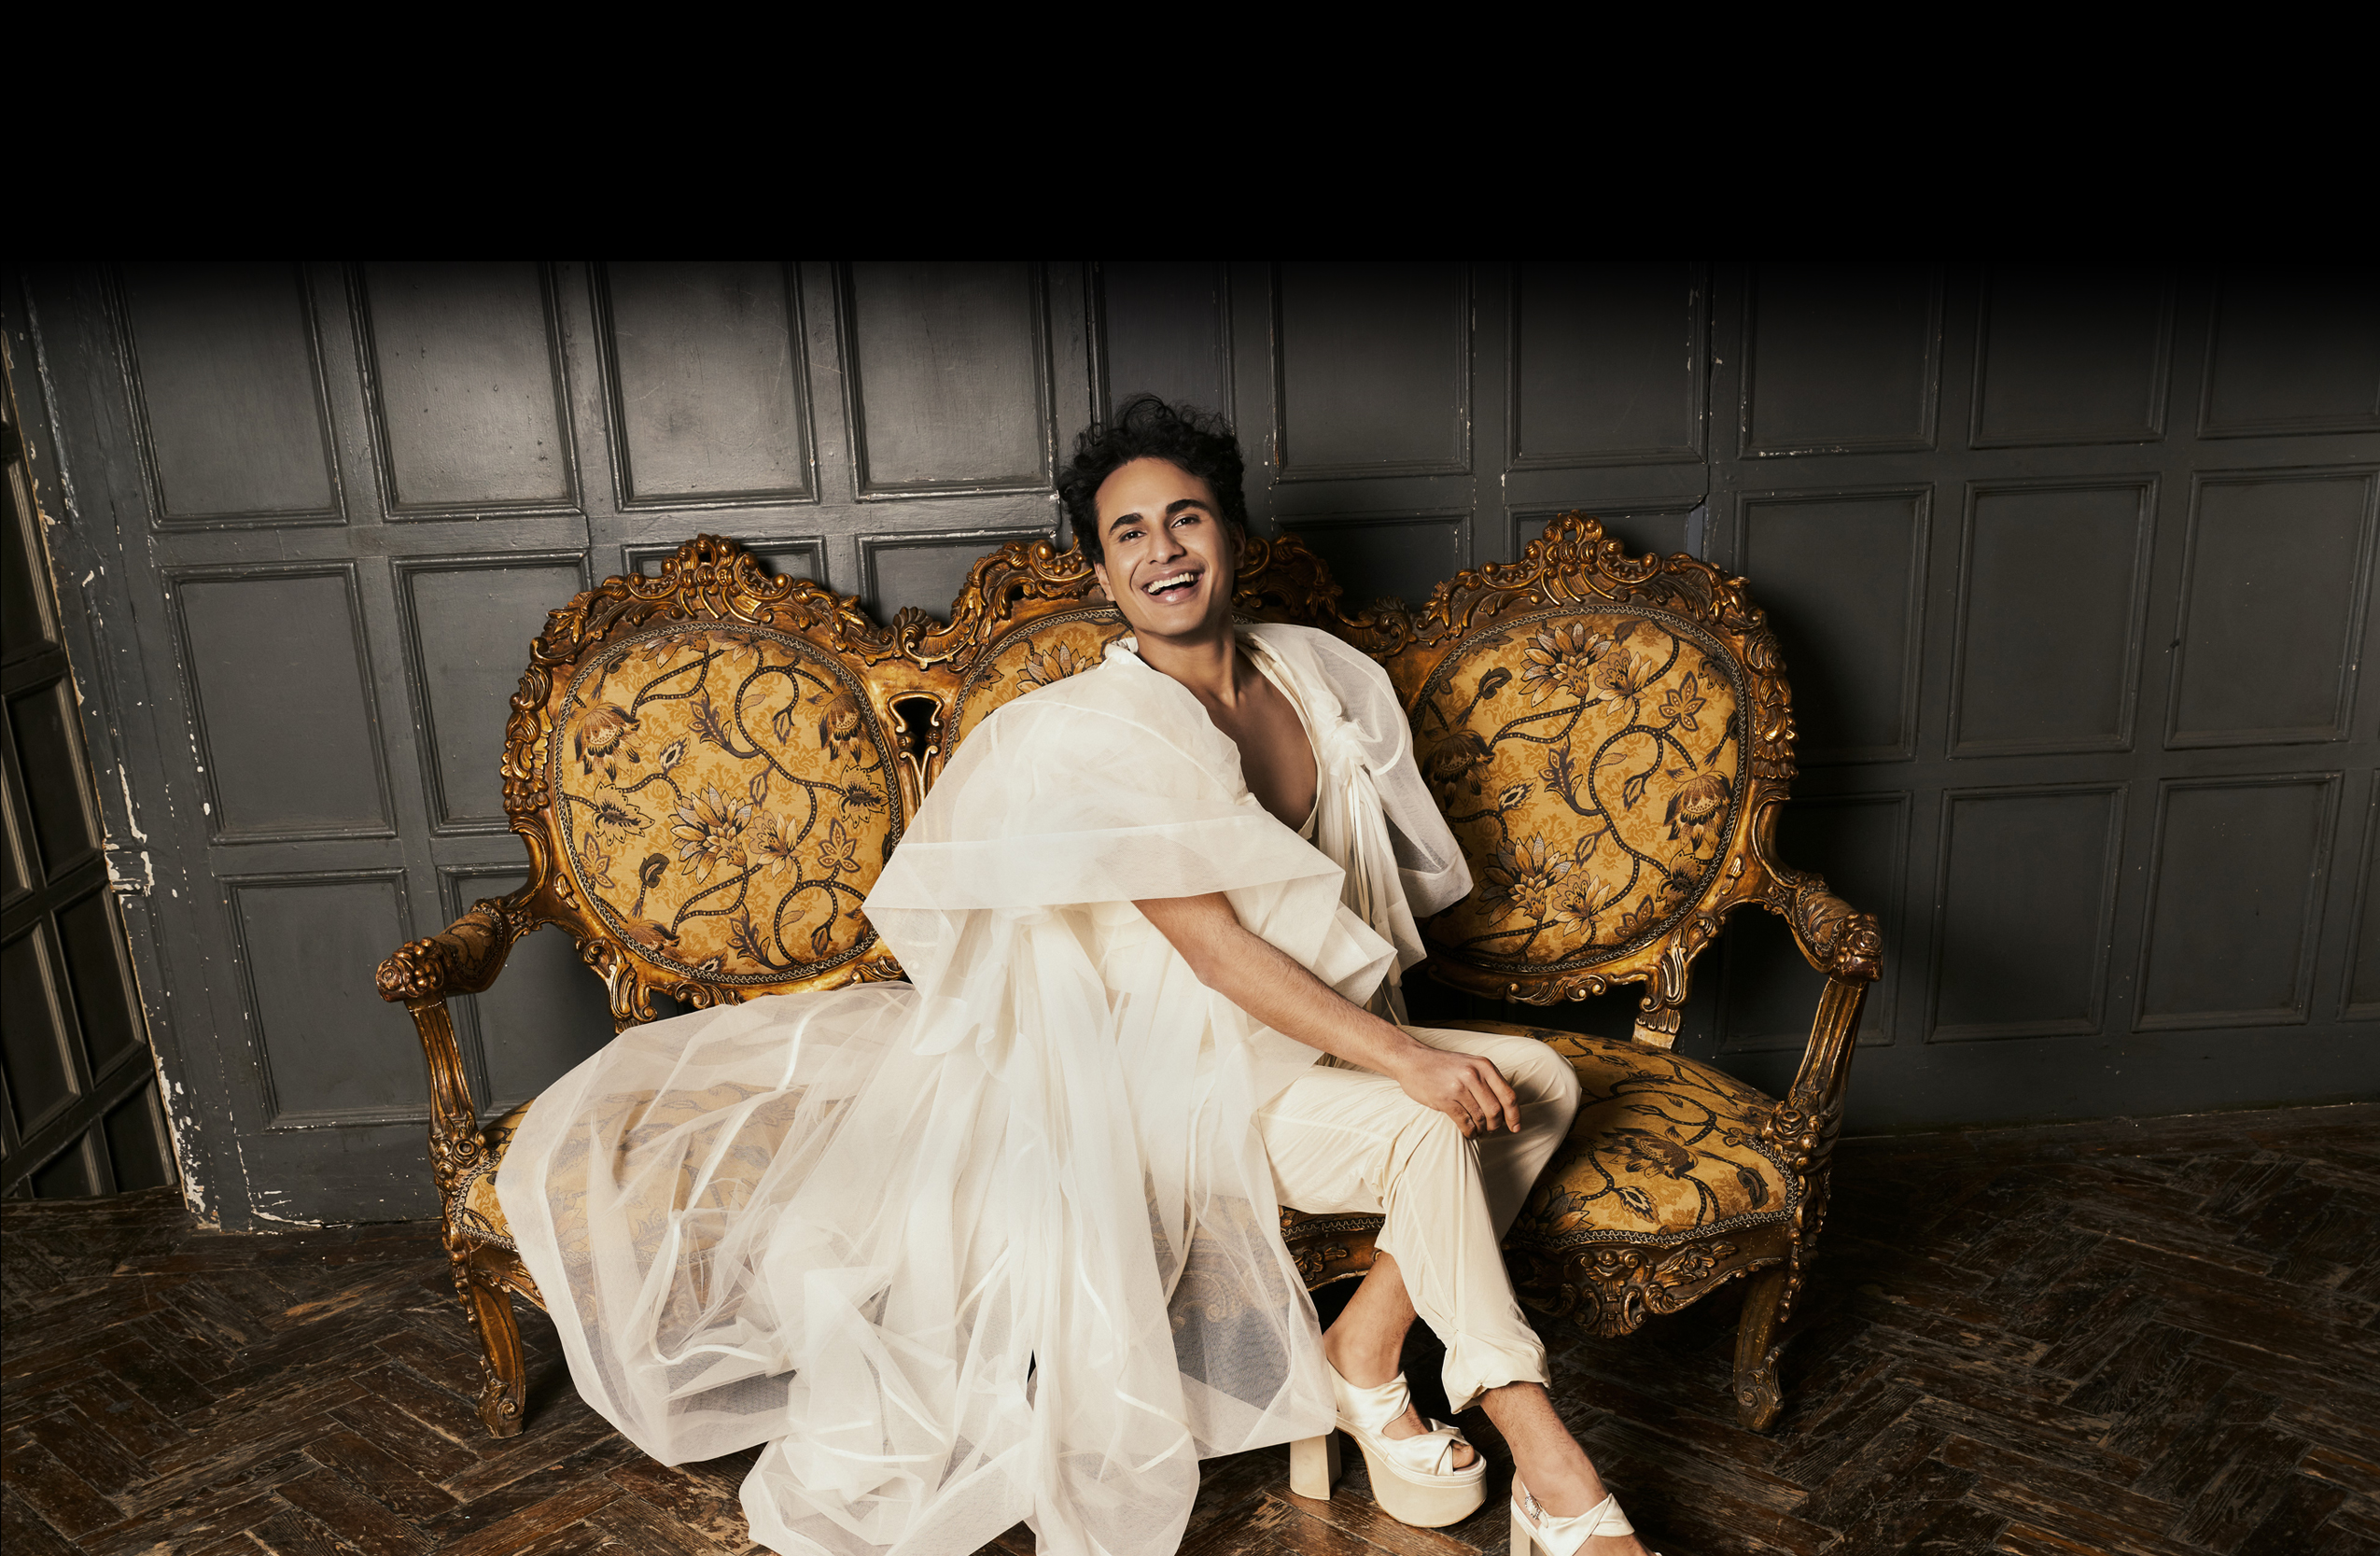 Image of Samuel in white dress on gold couch